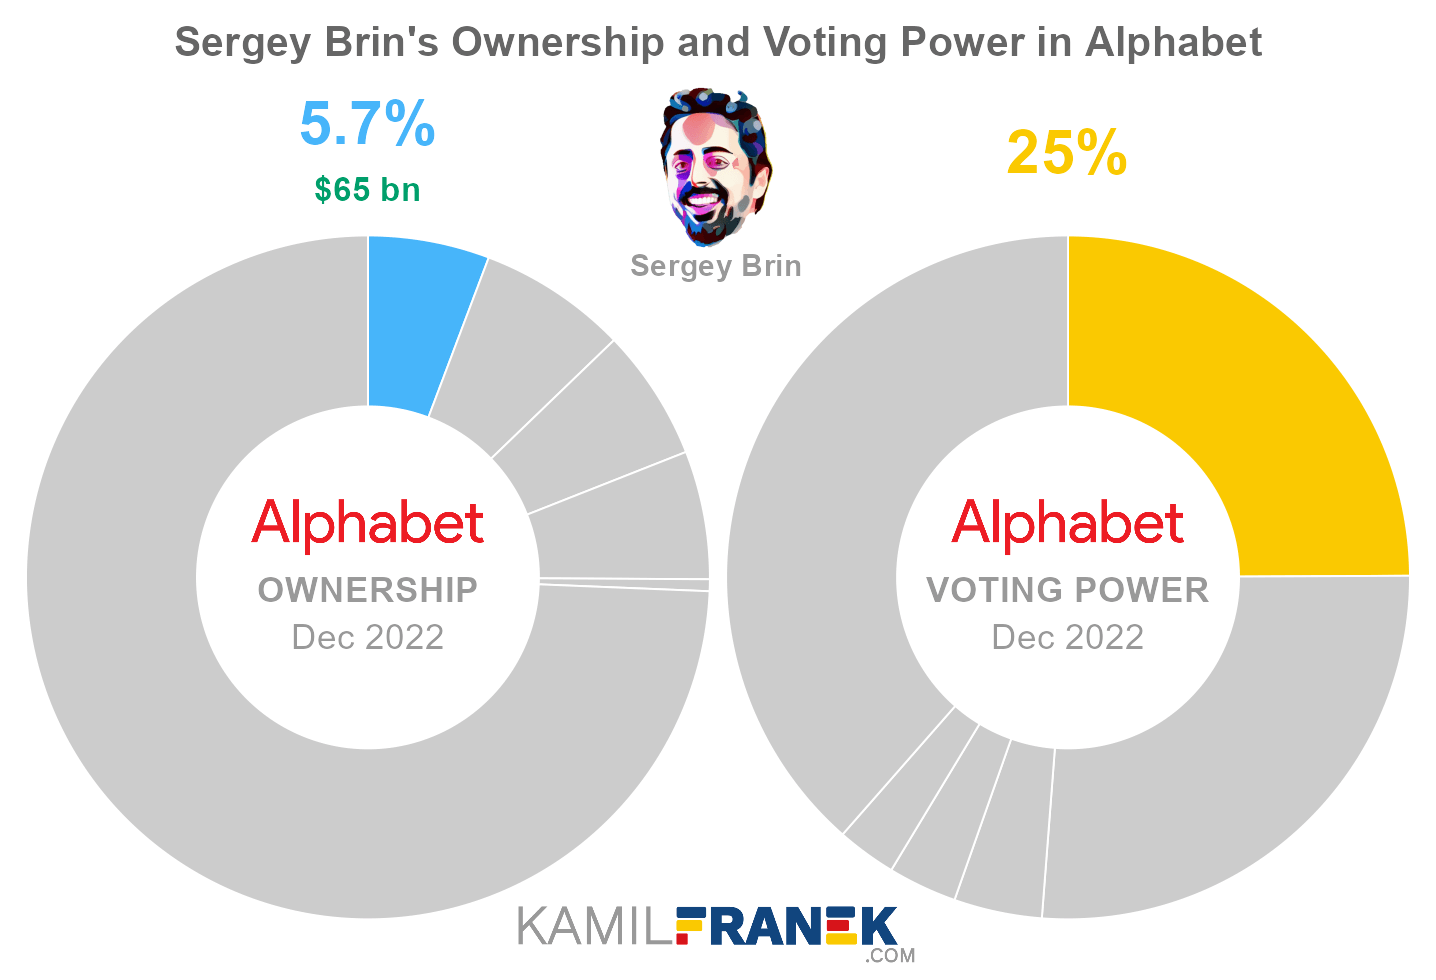 Alphabet largest shareholders share ownership vs vote control chart